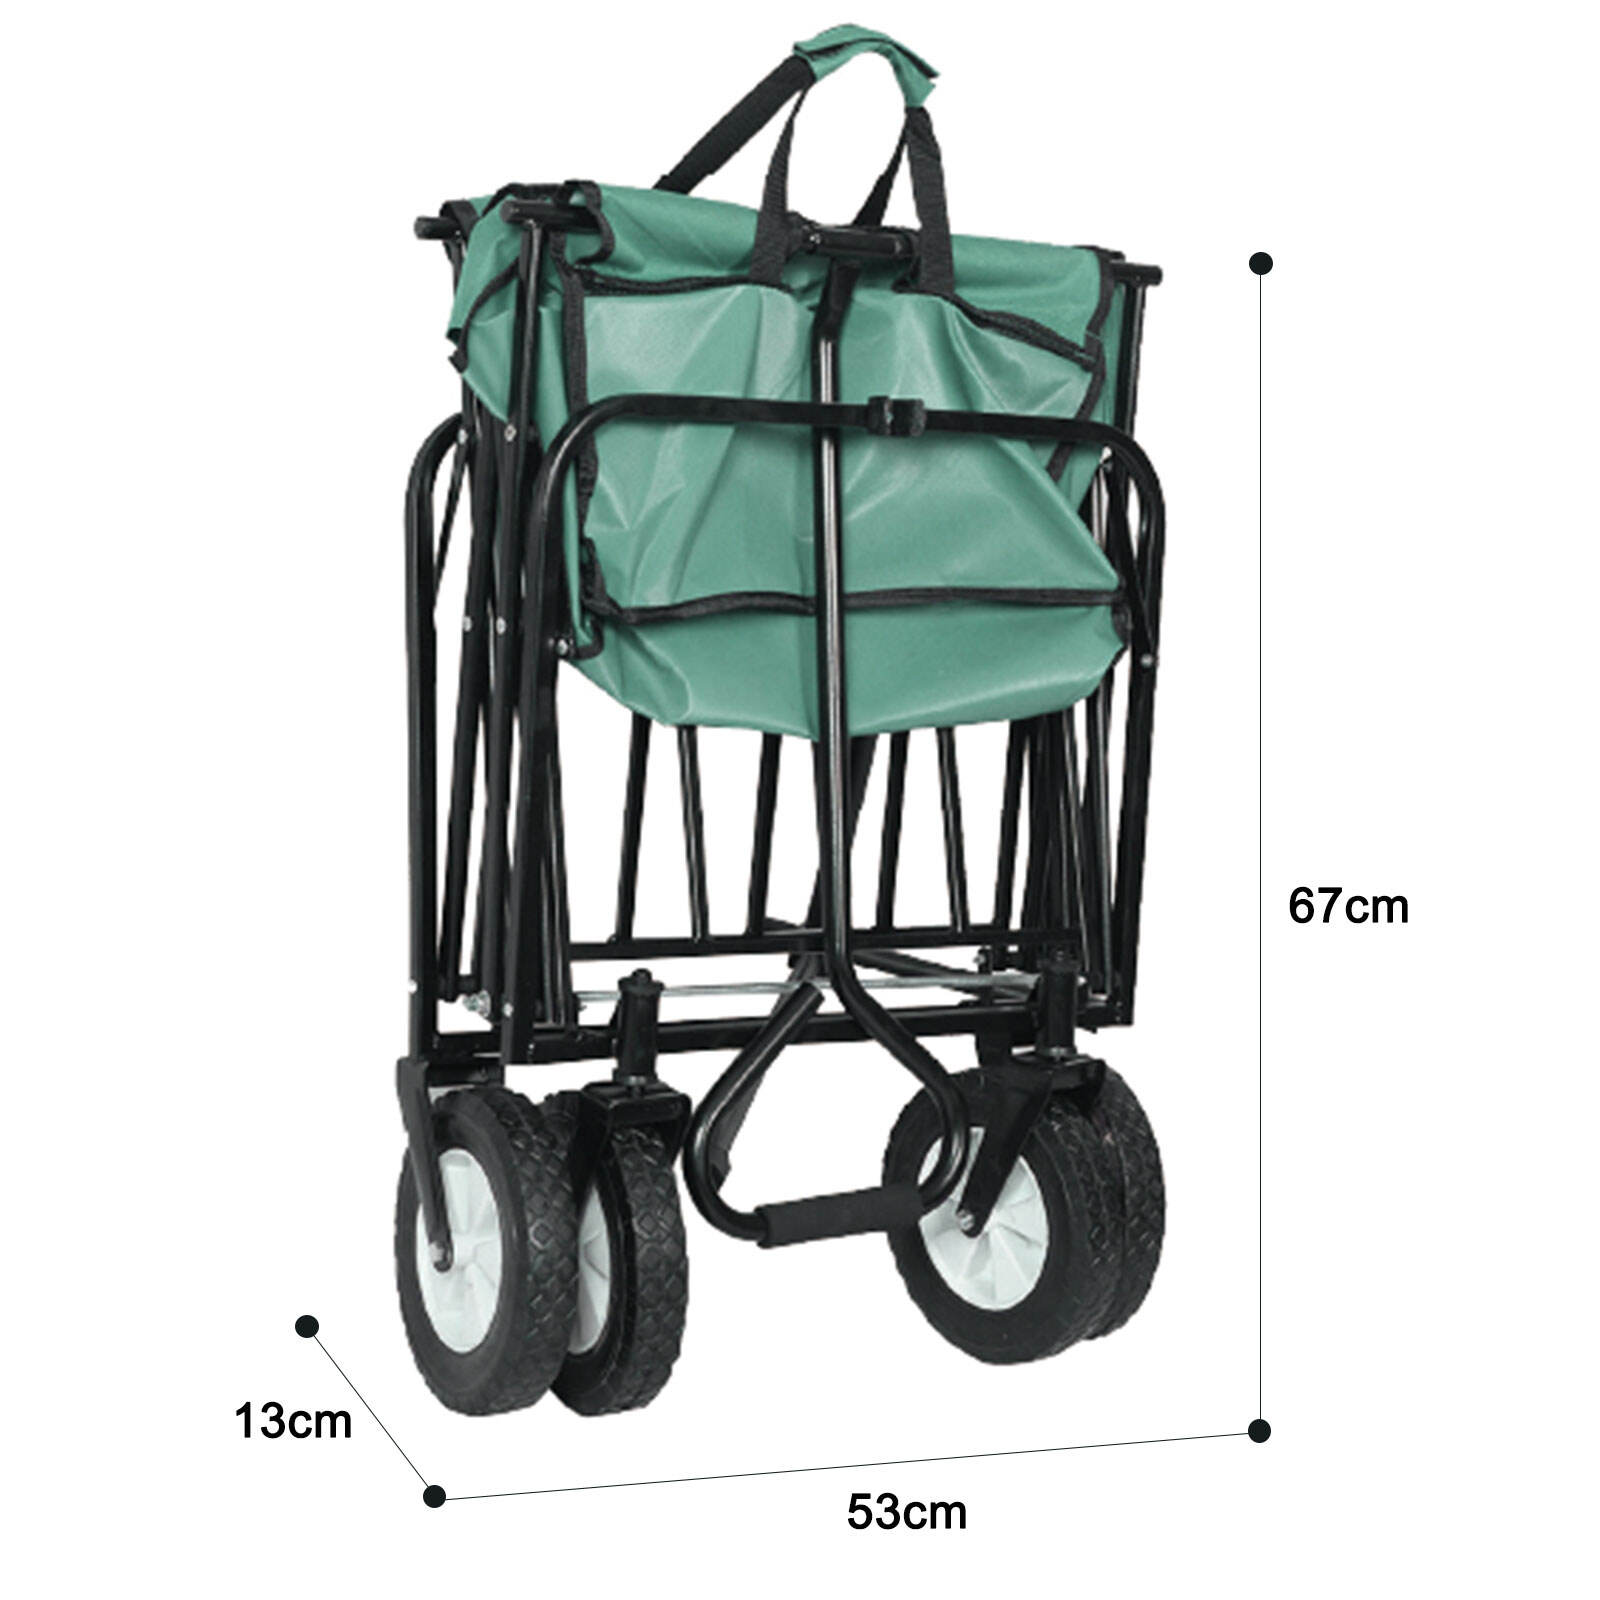 GT1801 Folding Wagon, Collapsible Camping Wagon Cart, for Outdoor details